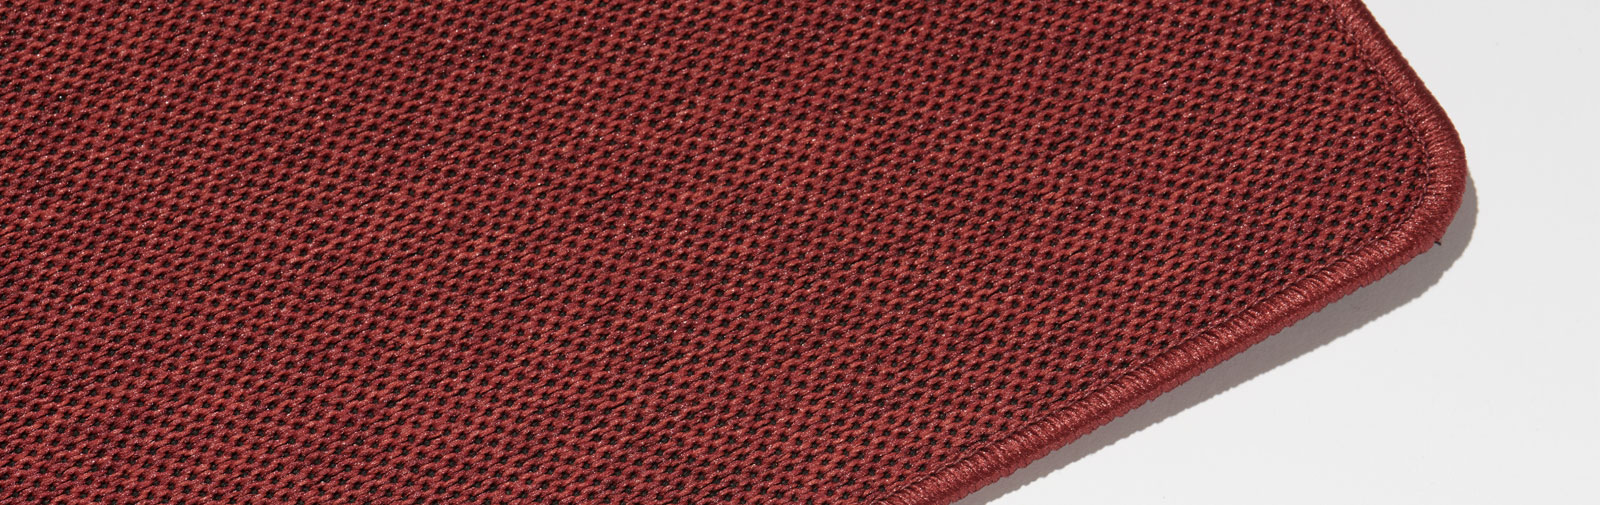 Kirchenteppich Wave Farbcode 101 Farbe rot